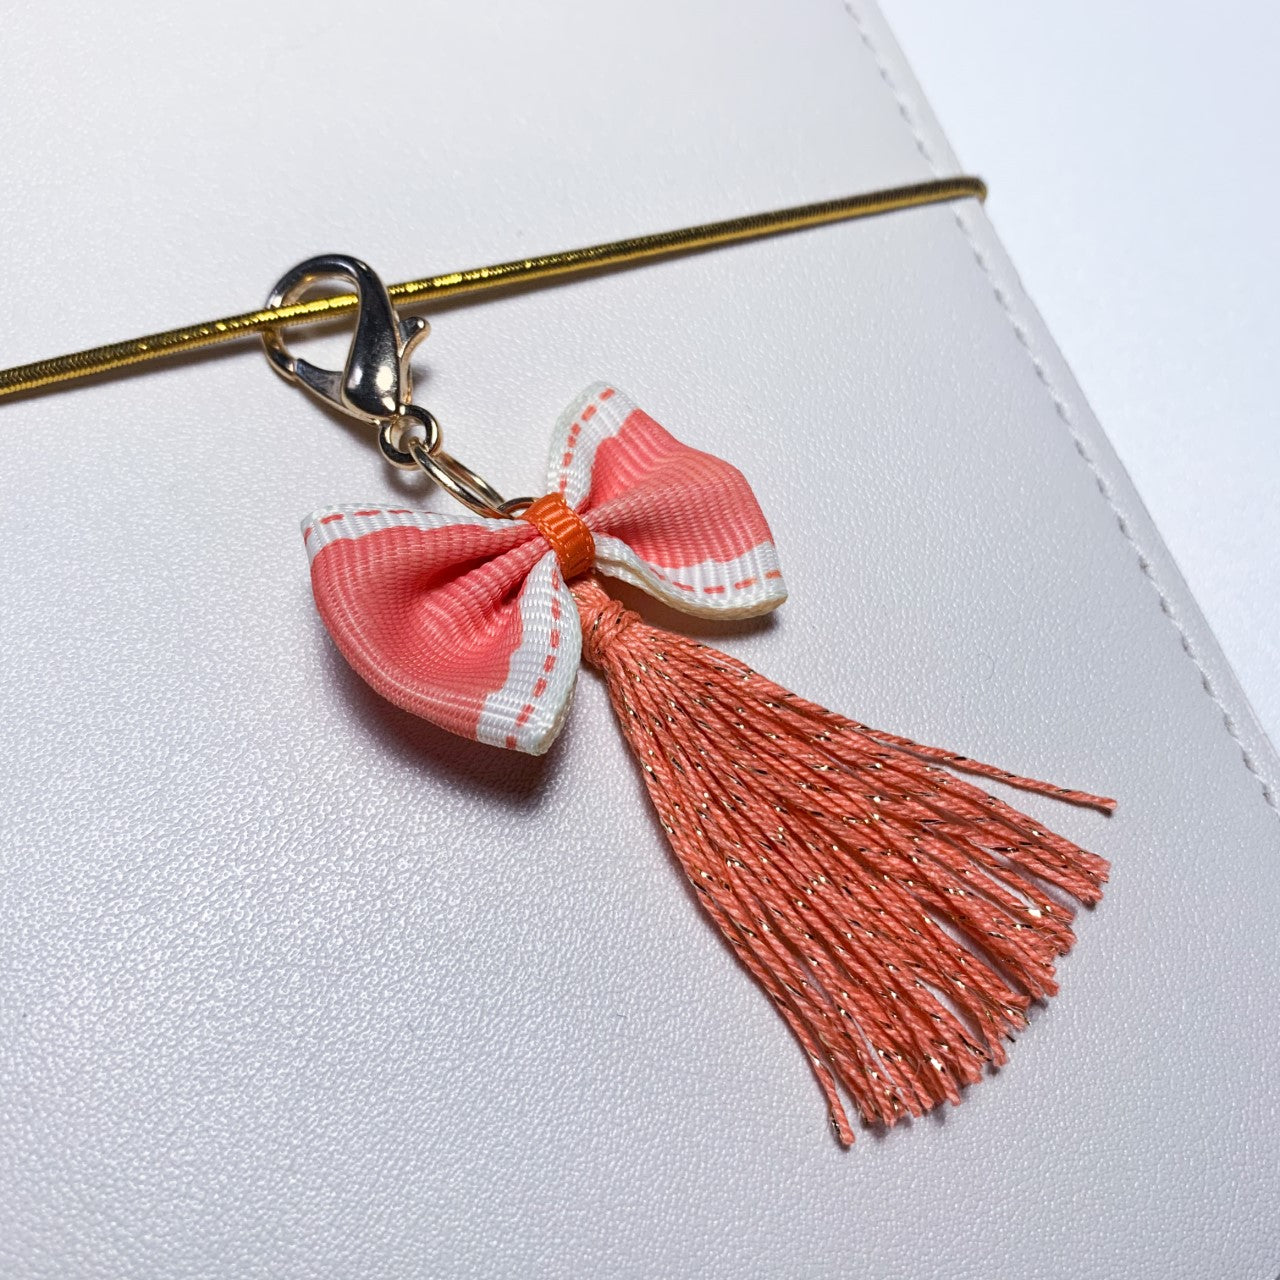 Bow and tassel charm